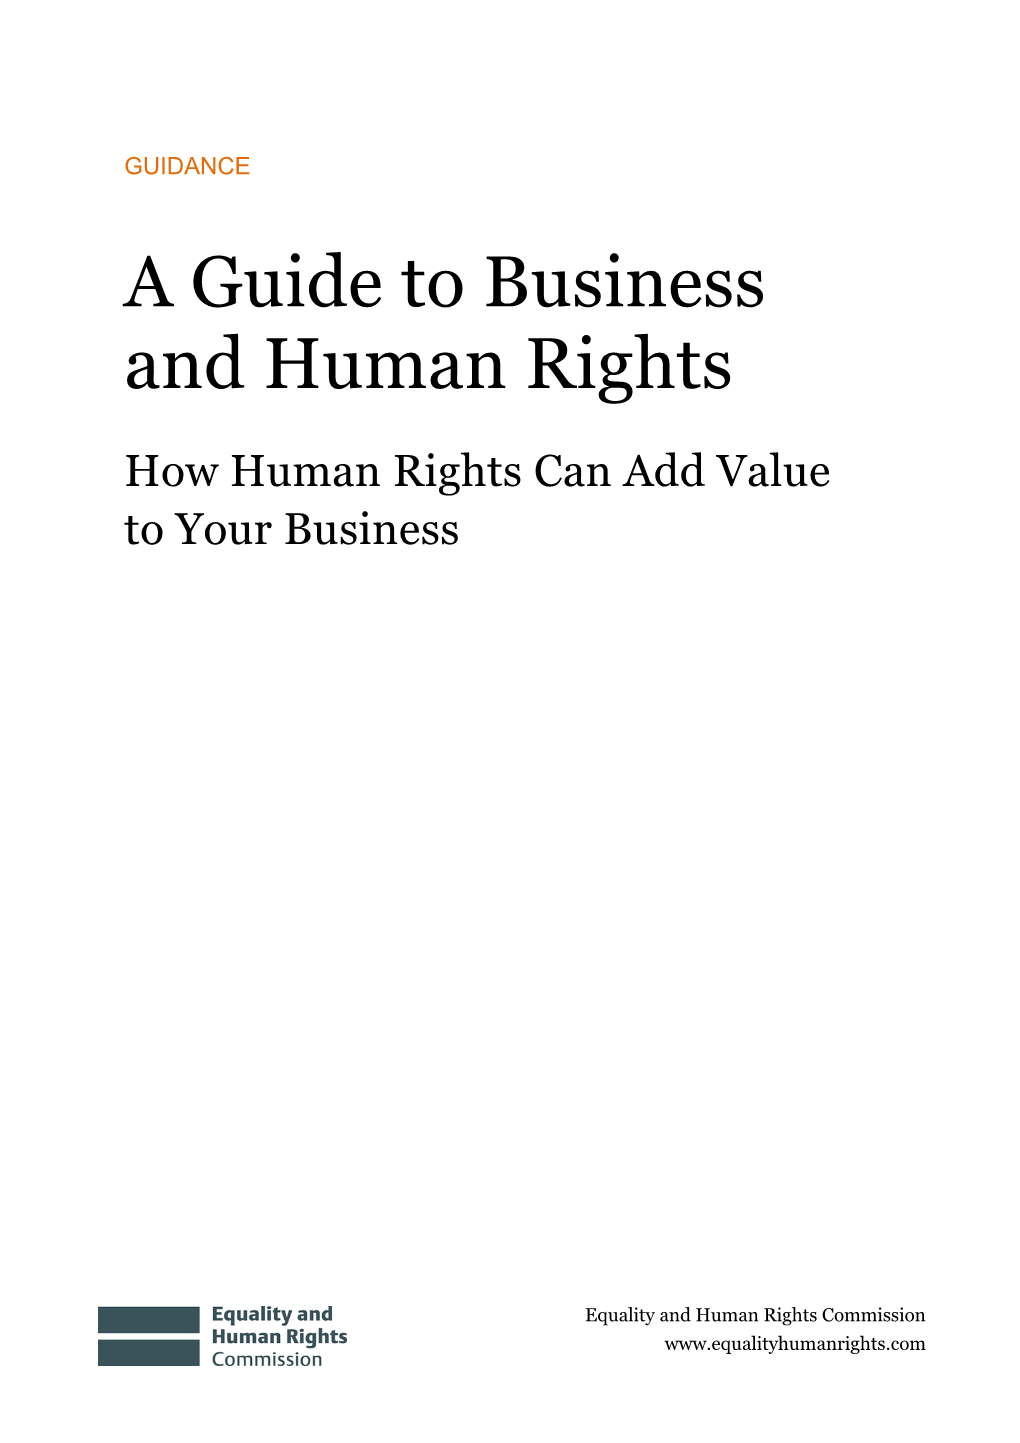 A Guide to Business and Human Rights